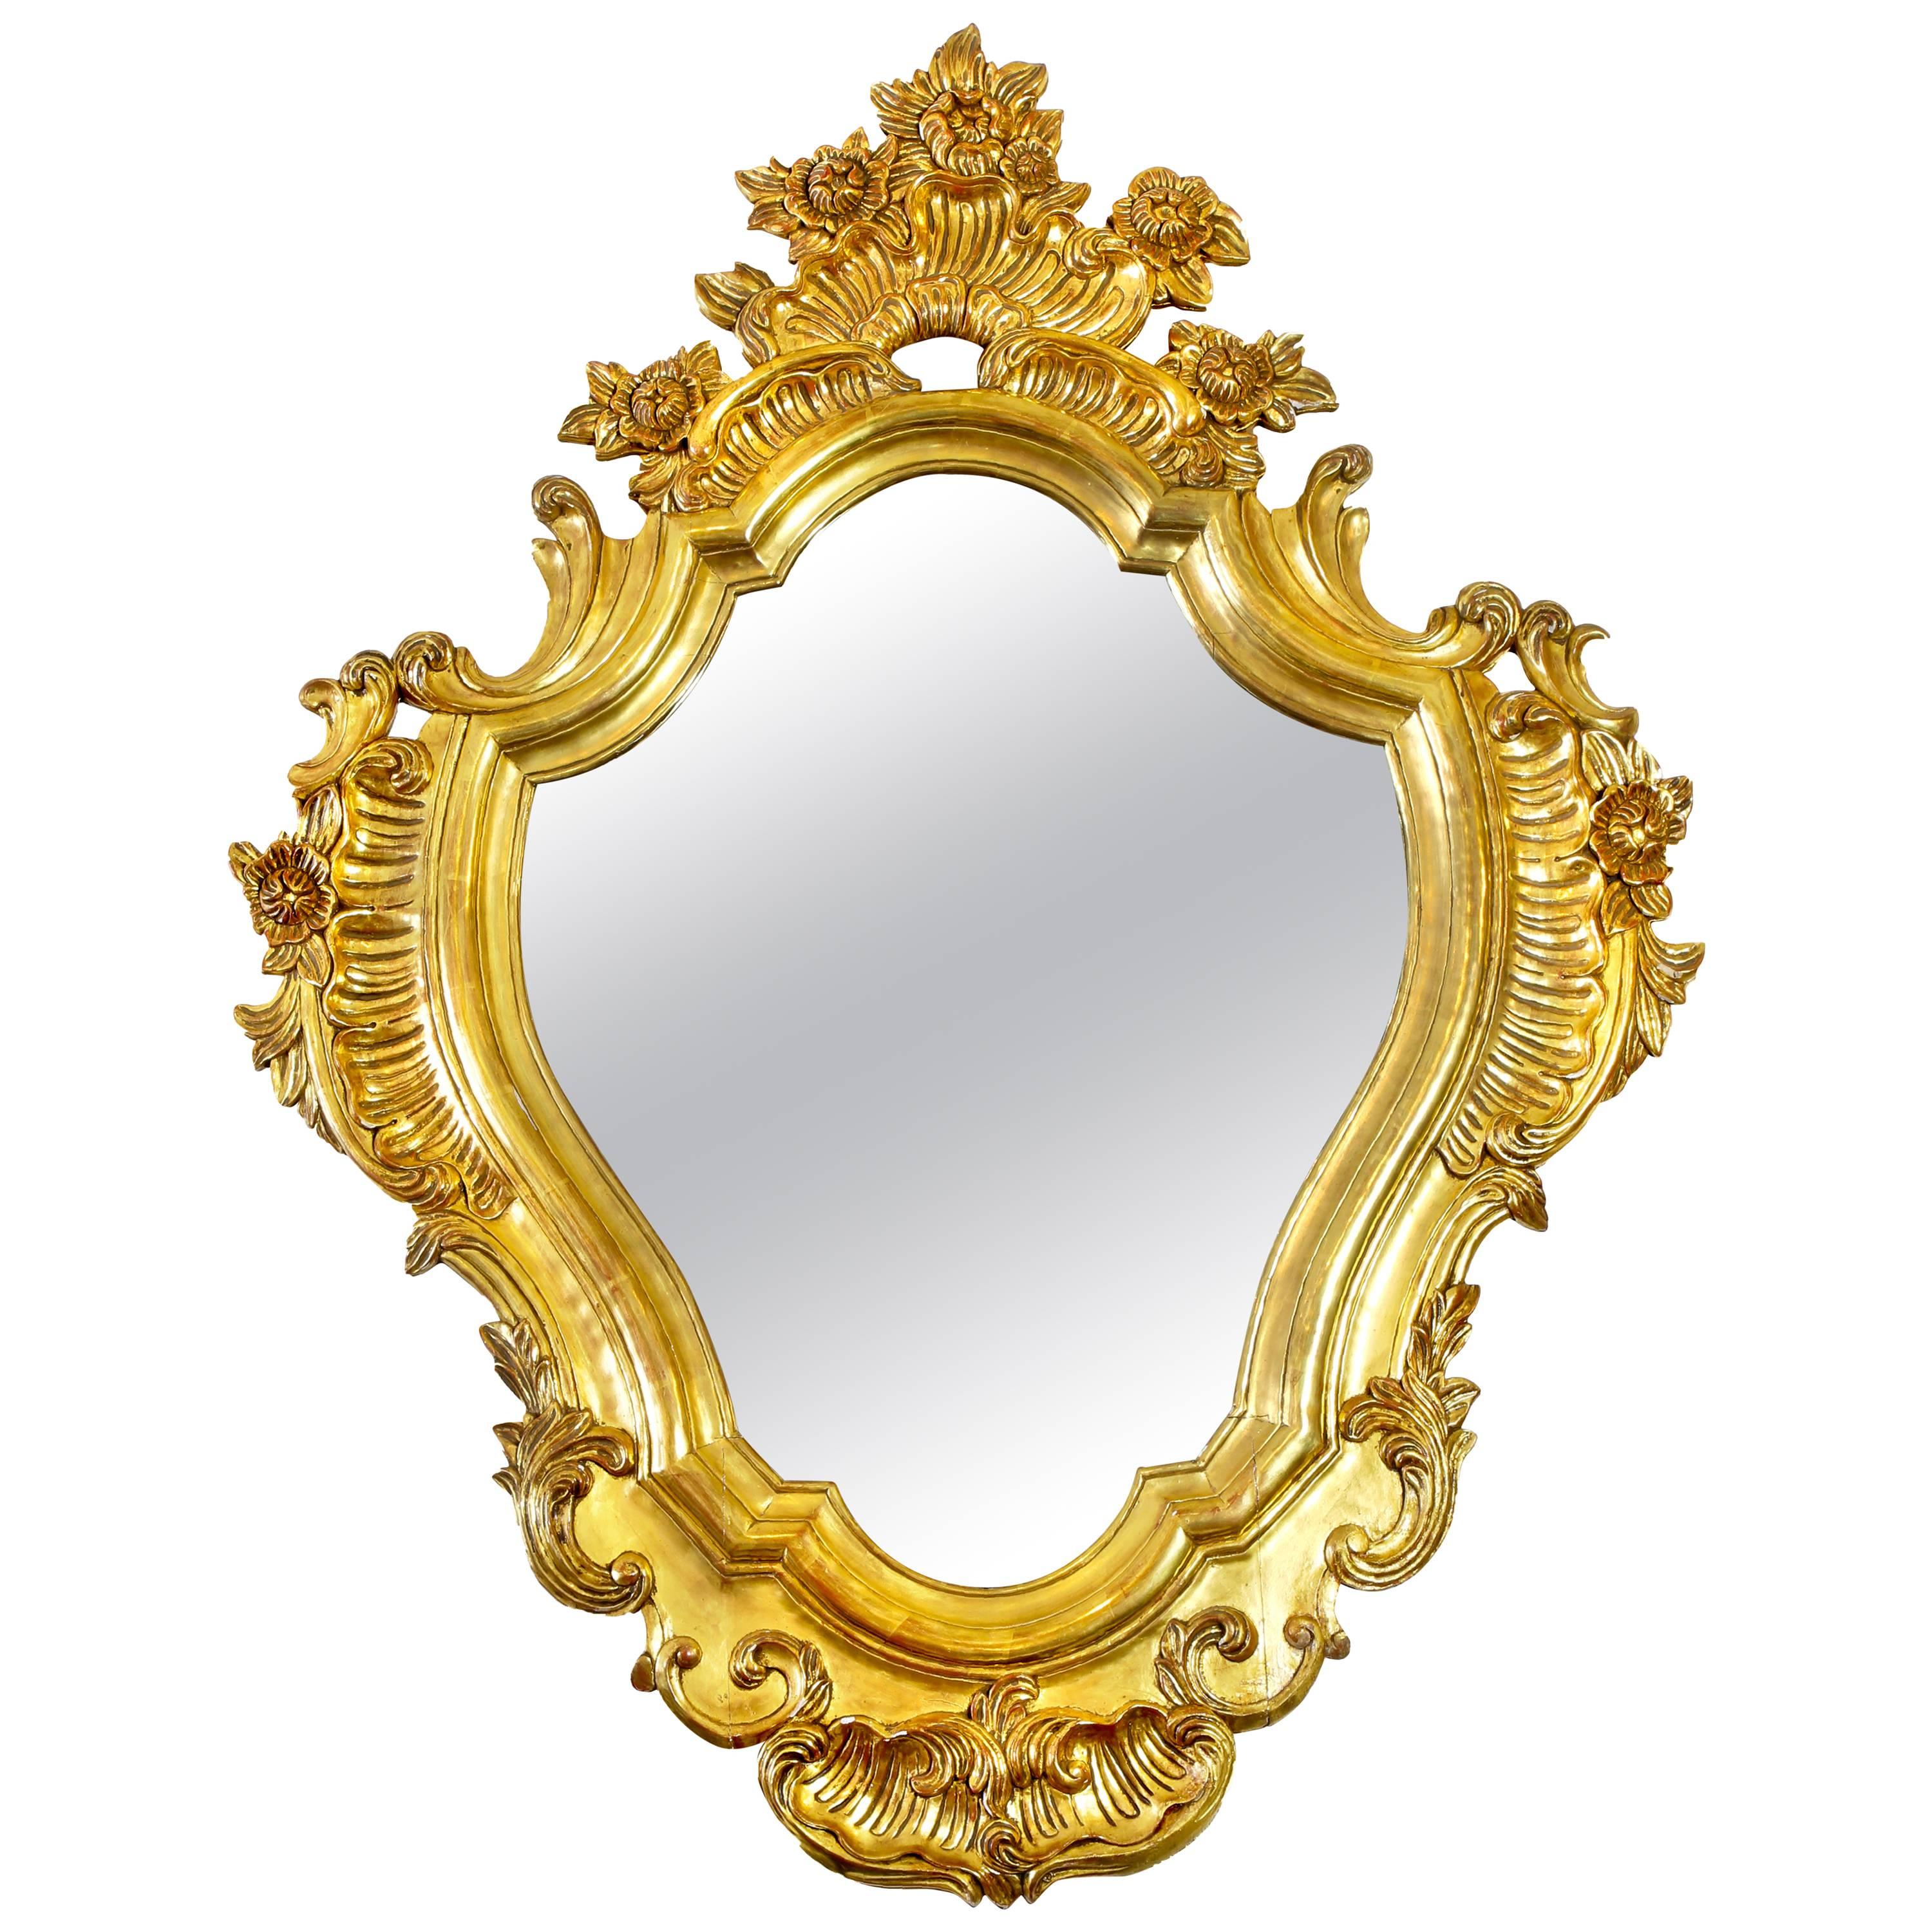 Italian Floral Scrolled Giltwood Wall Mirror For Sale